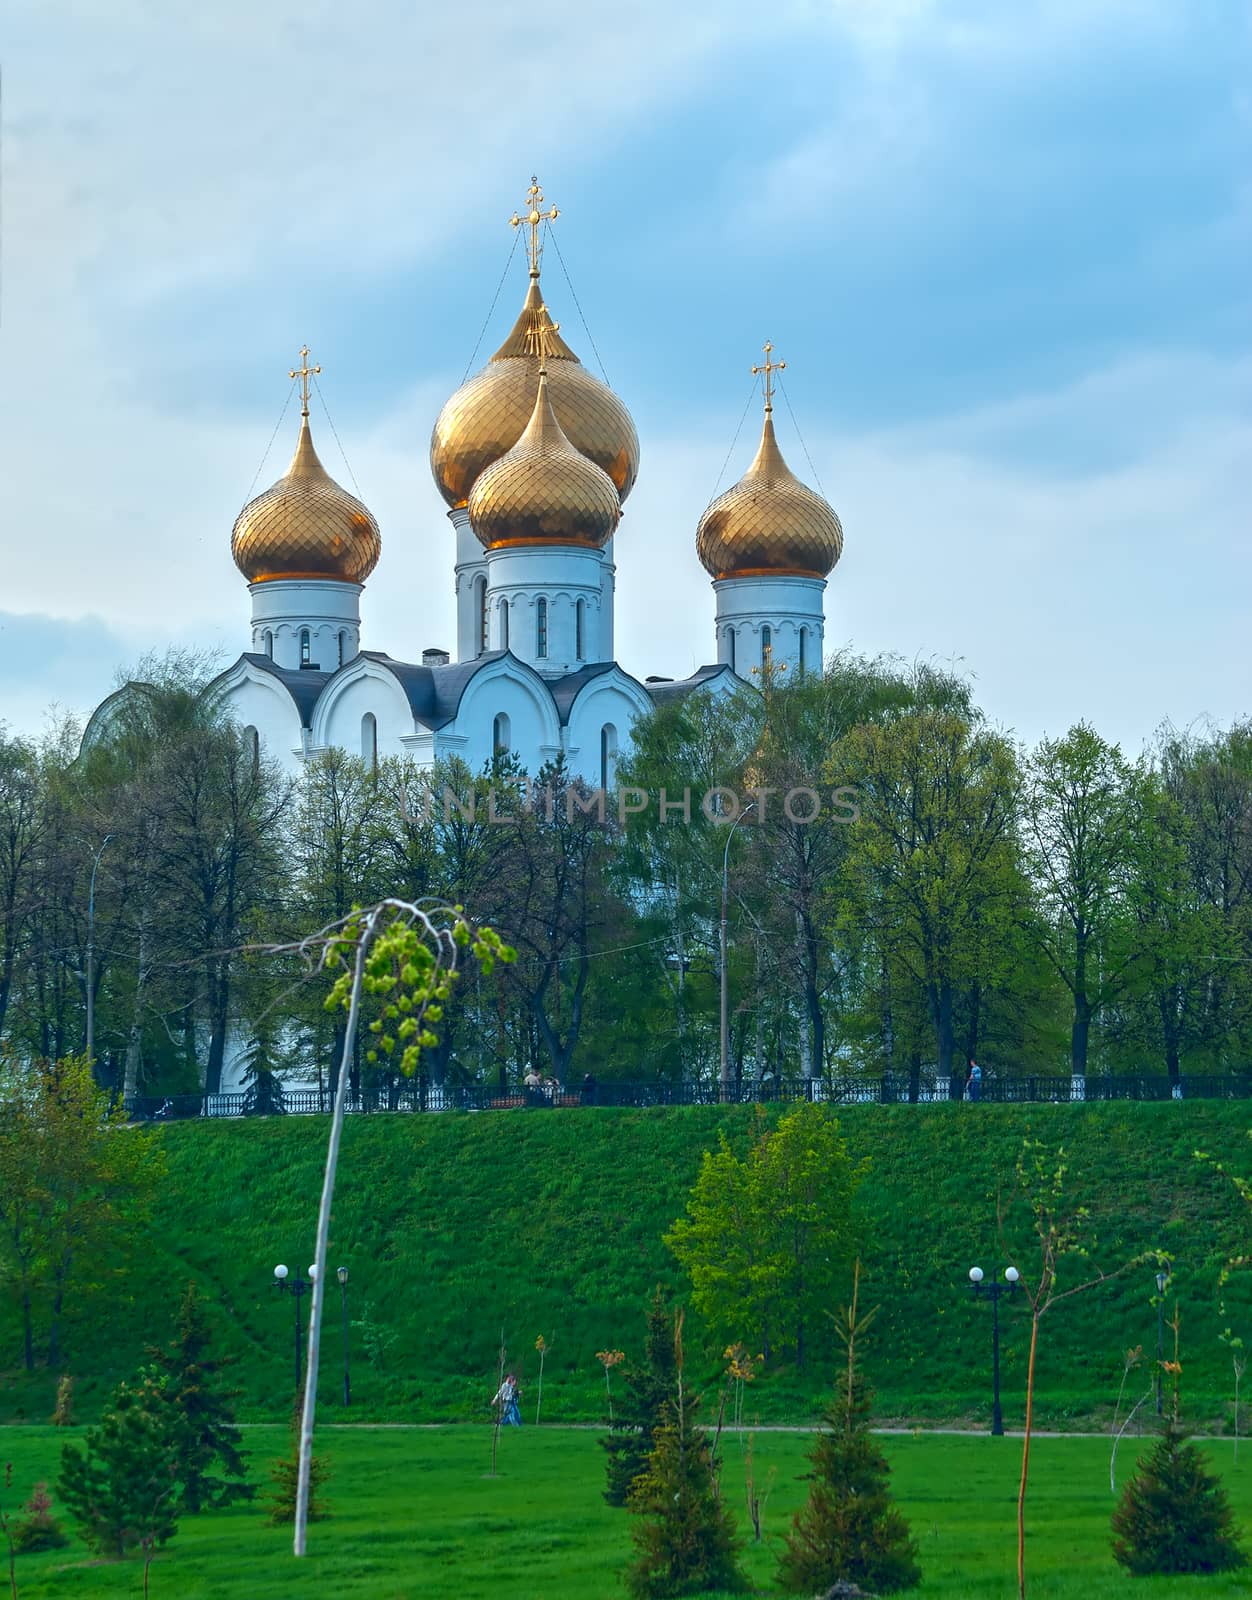 Ancient ortodox christian curch with golden domes in cloudy day